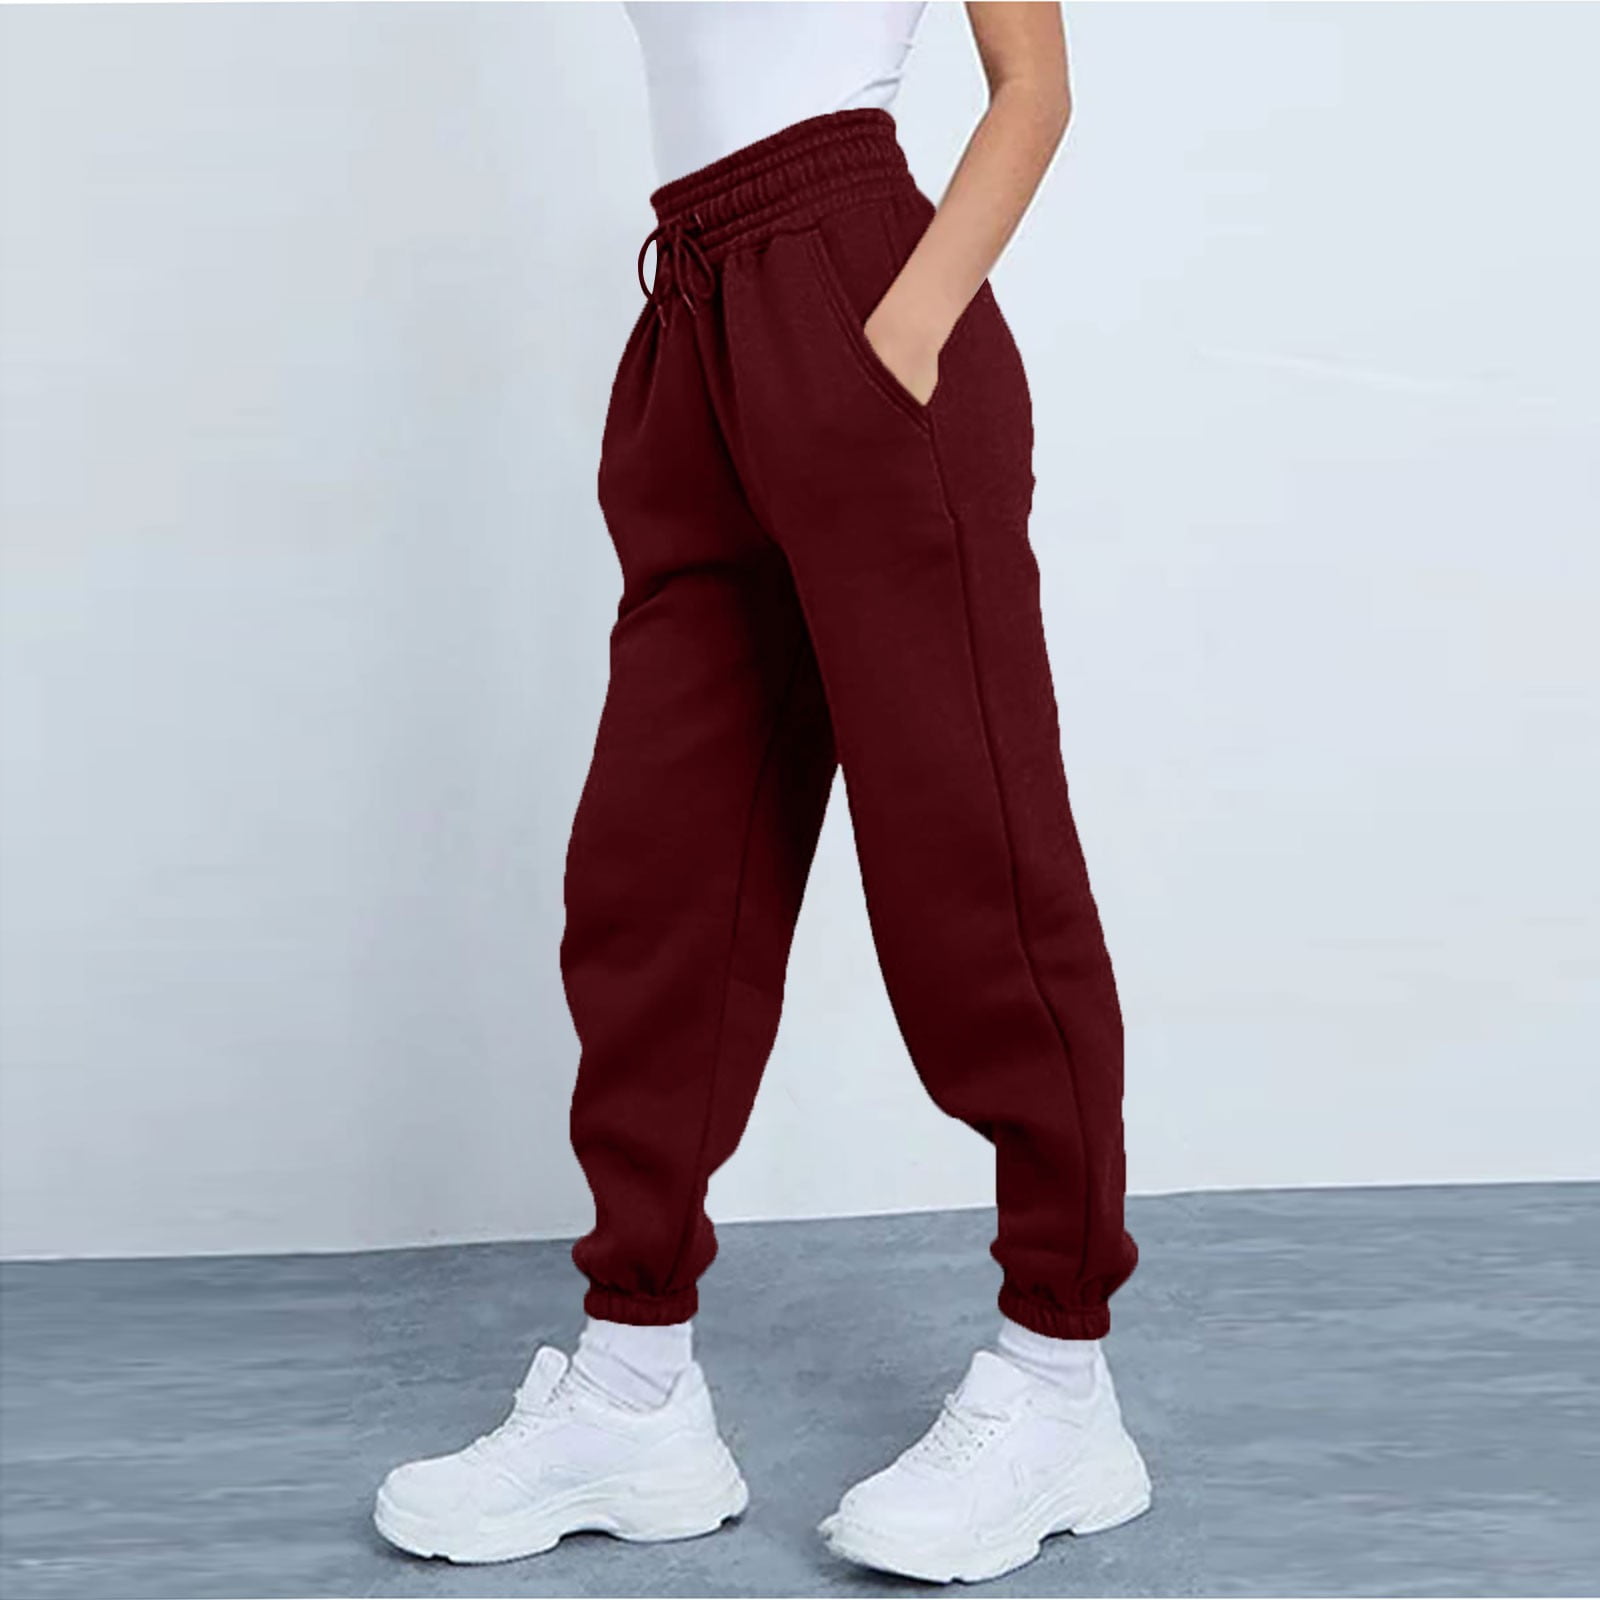 NILLLY Wide Leg Pants Women Drawstring Casual Fashion Sport Solid Color  Outfits Sweatpants Trousers with Pockets Ladies Pants Wine / S 